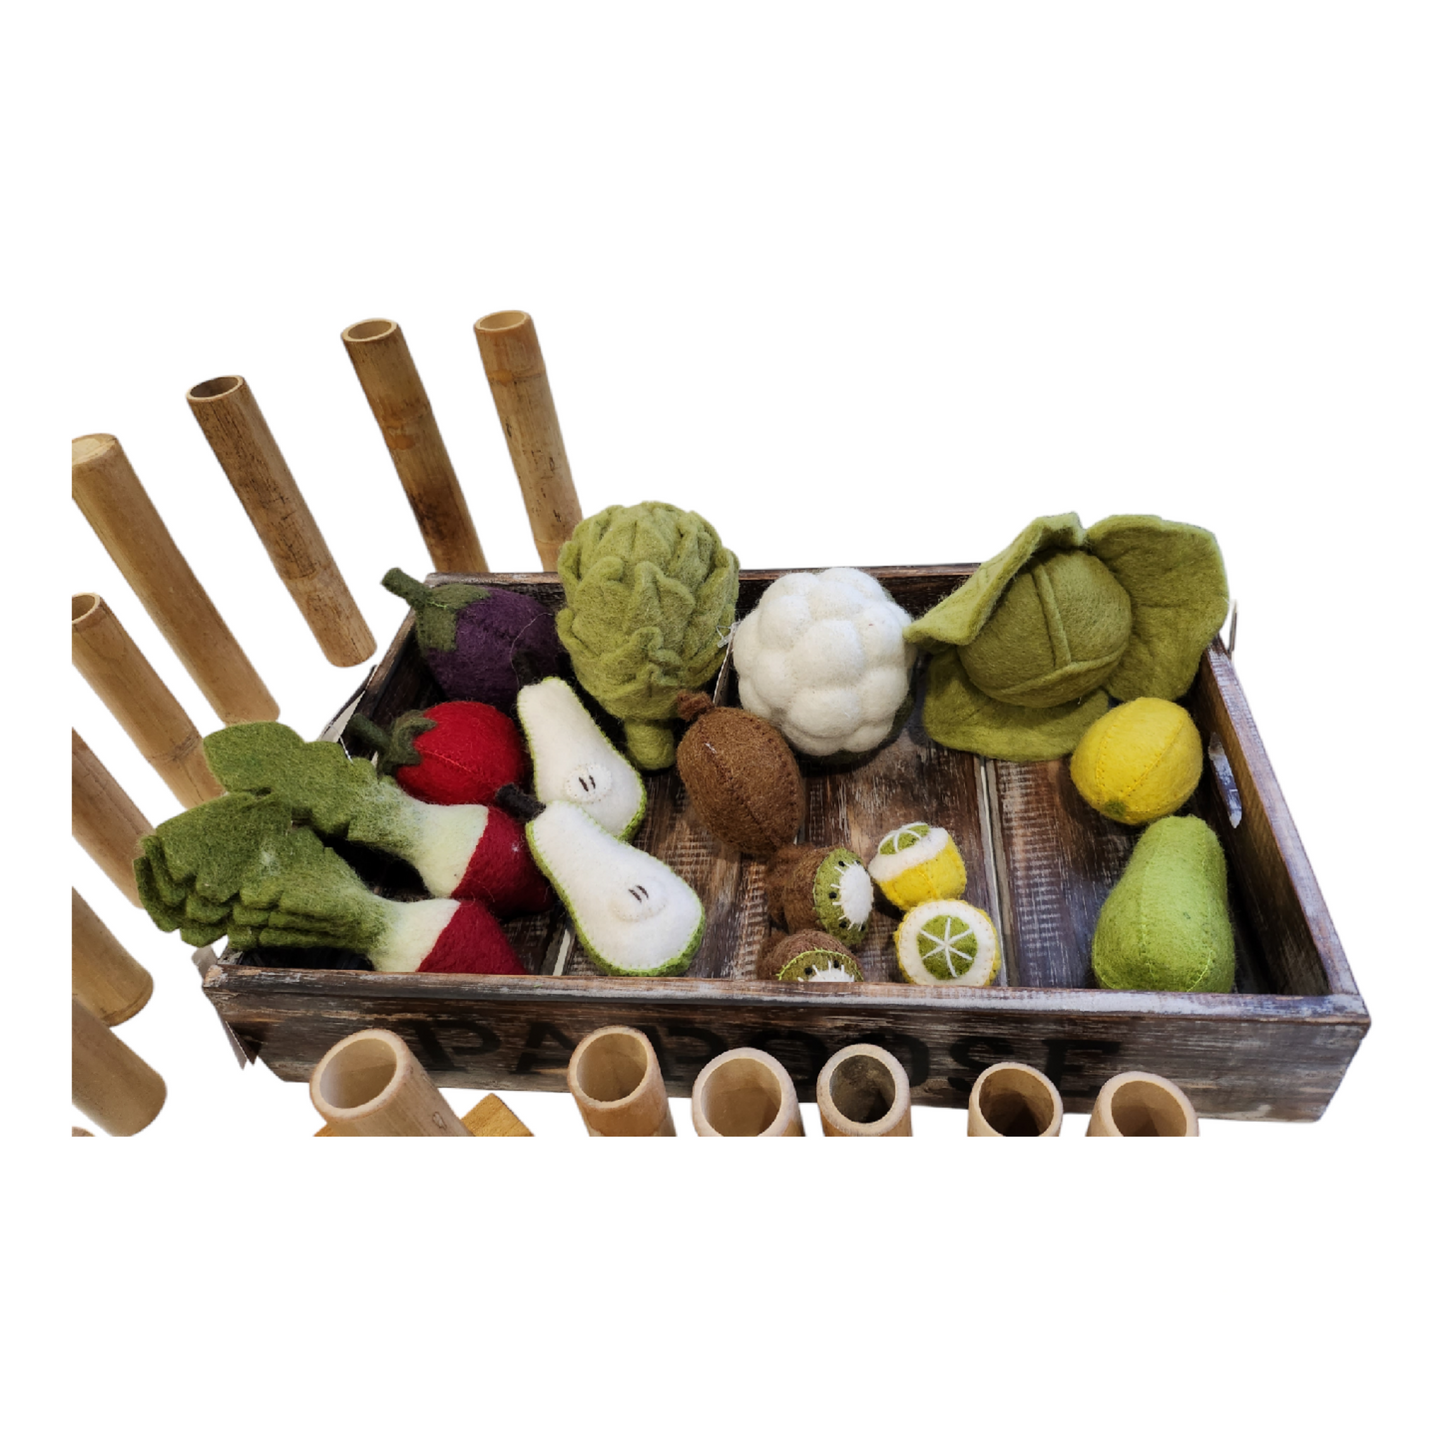 Papoose Felt Fruits and Vegetables (set of 9) in wooden crate